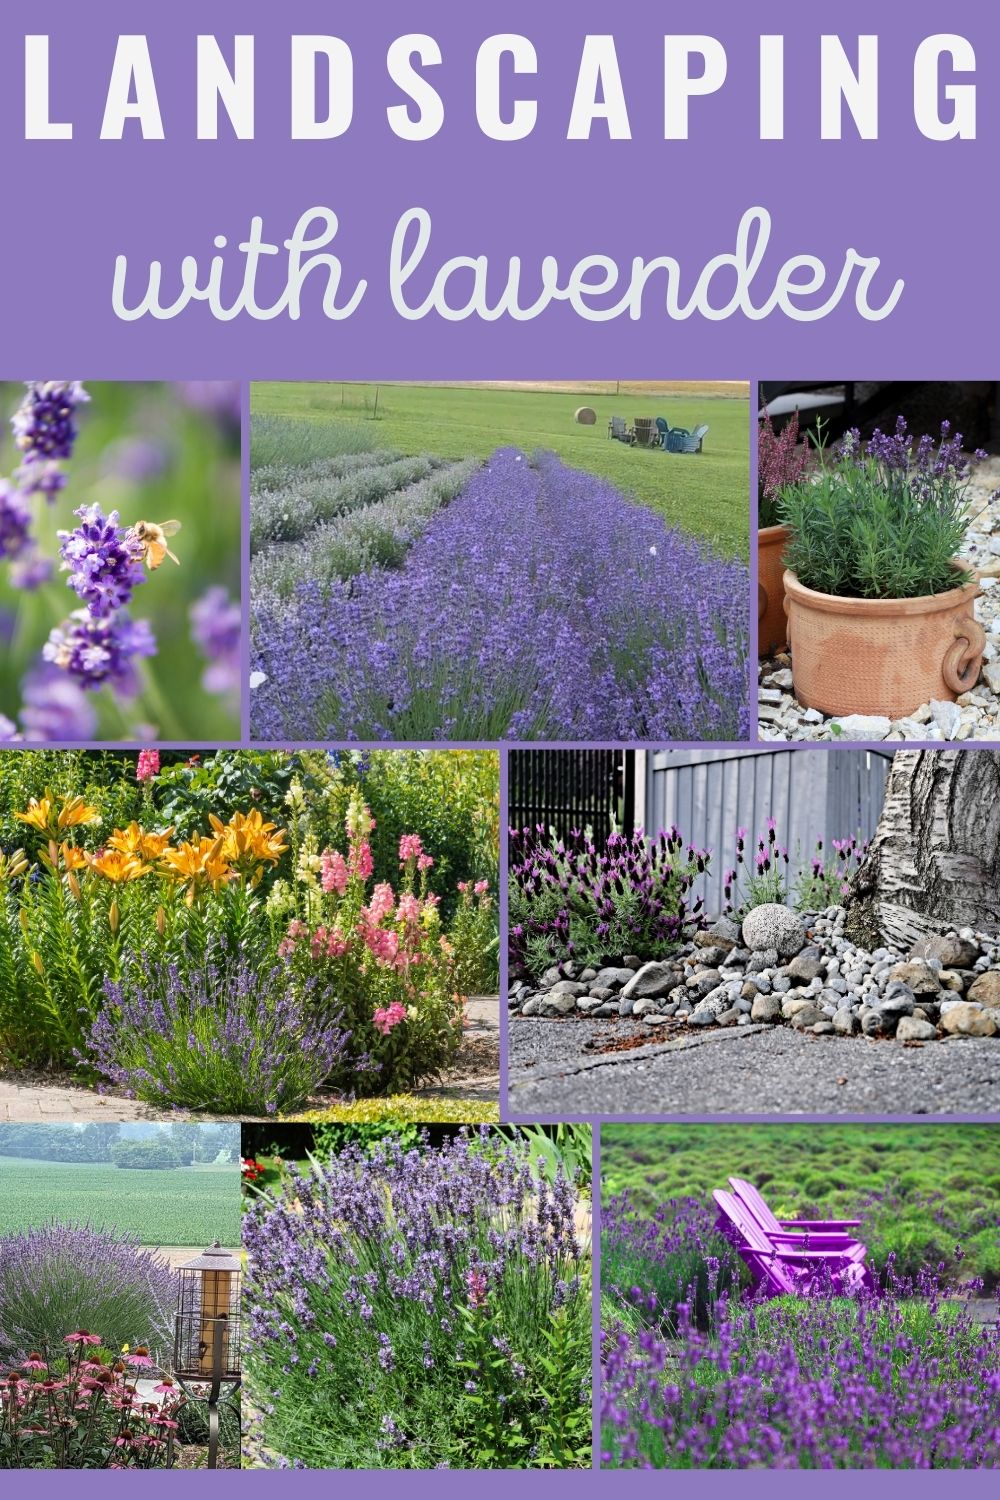 Landscaping with lavender.